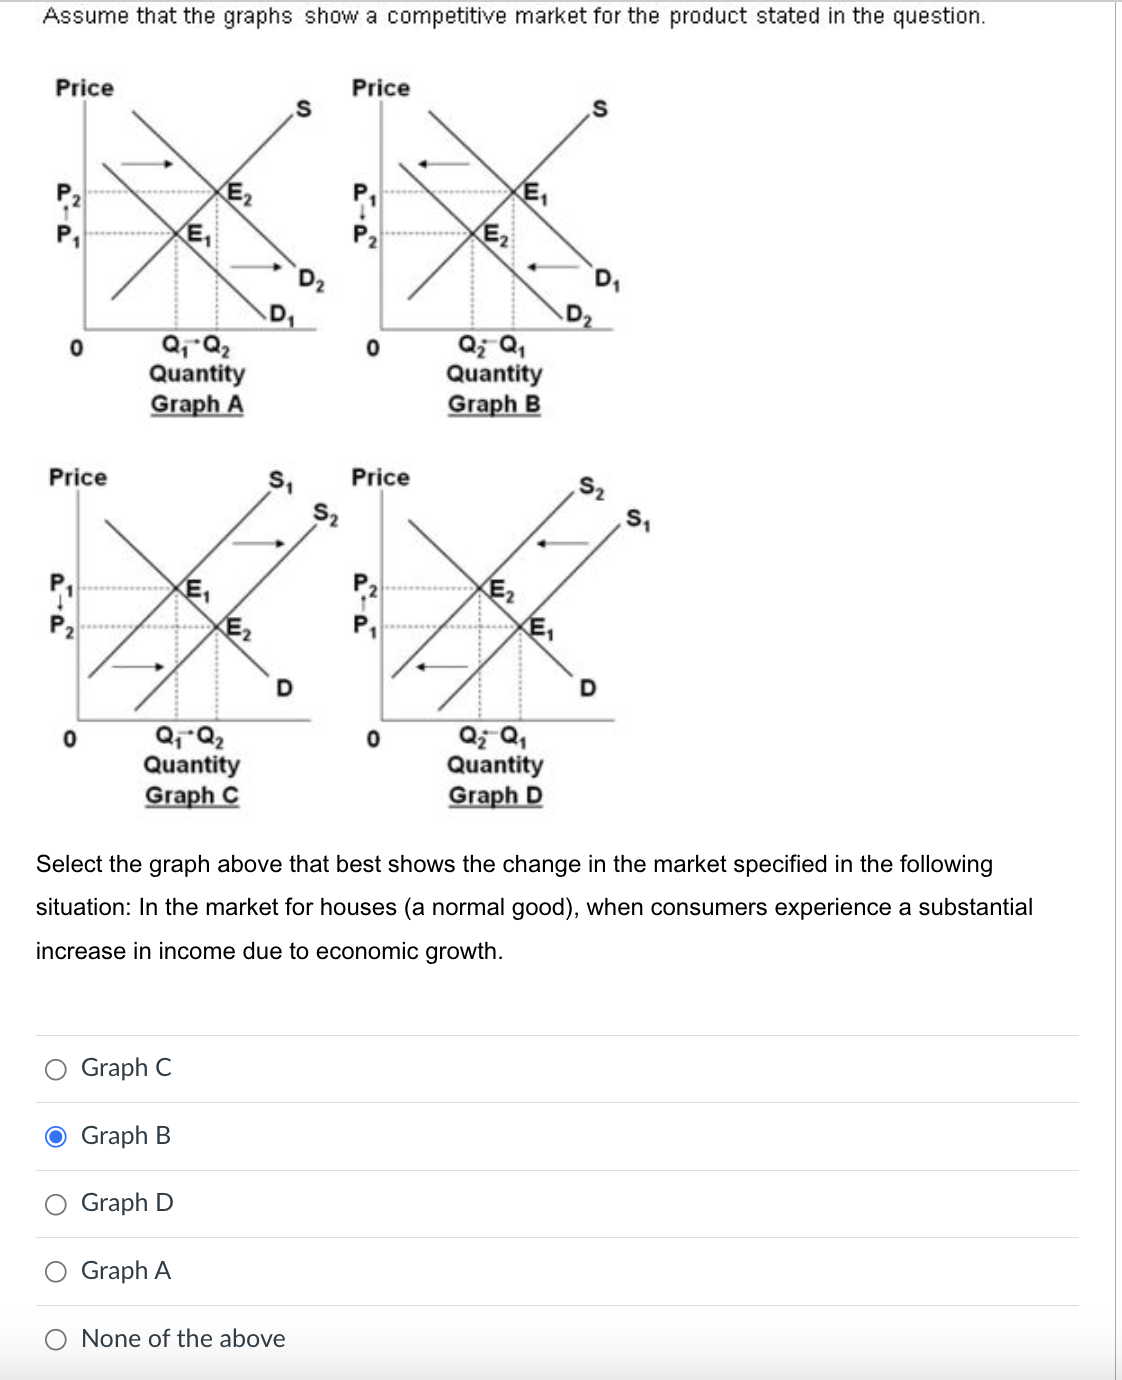 Assume that the graphs show a competitive market for the product stated in the question.
Price
0
Price
0
Q₁ Q₂
Quantity
Graph A
E₁
Q₁ Q₂
Quantity
Graph C
Graph C
O Graph B
E₂
O Graph D
Graph A
S
D₁
51
None of the above
52
Price
P
0
Price
20
0
E₂
E₁
Q₂ Q₁
Quantity
Graph B
Q₂ Q₁
Quantity
Graph D
Select the graph above that best shows the change in the market specified in the following
situation: In the market for houses (a normal good), when consumers experience a substantial
increase in income due to economic growth.
D₂
52
S1